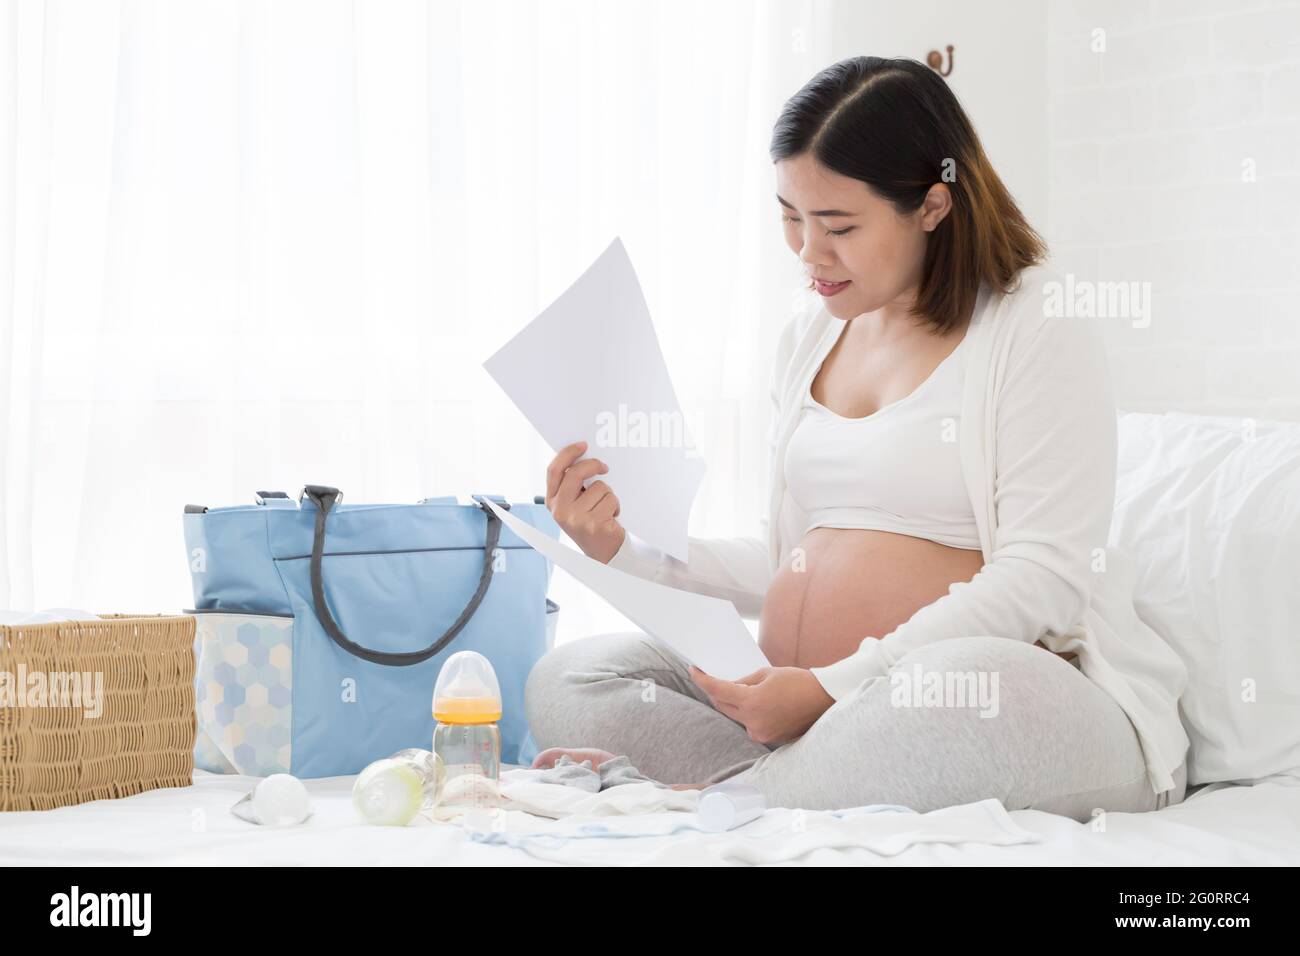 pregnant woman preparing and planning baby products before prenatal Stock Photo